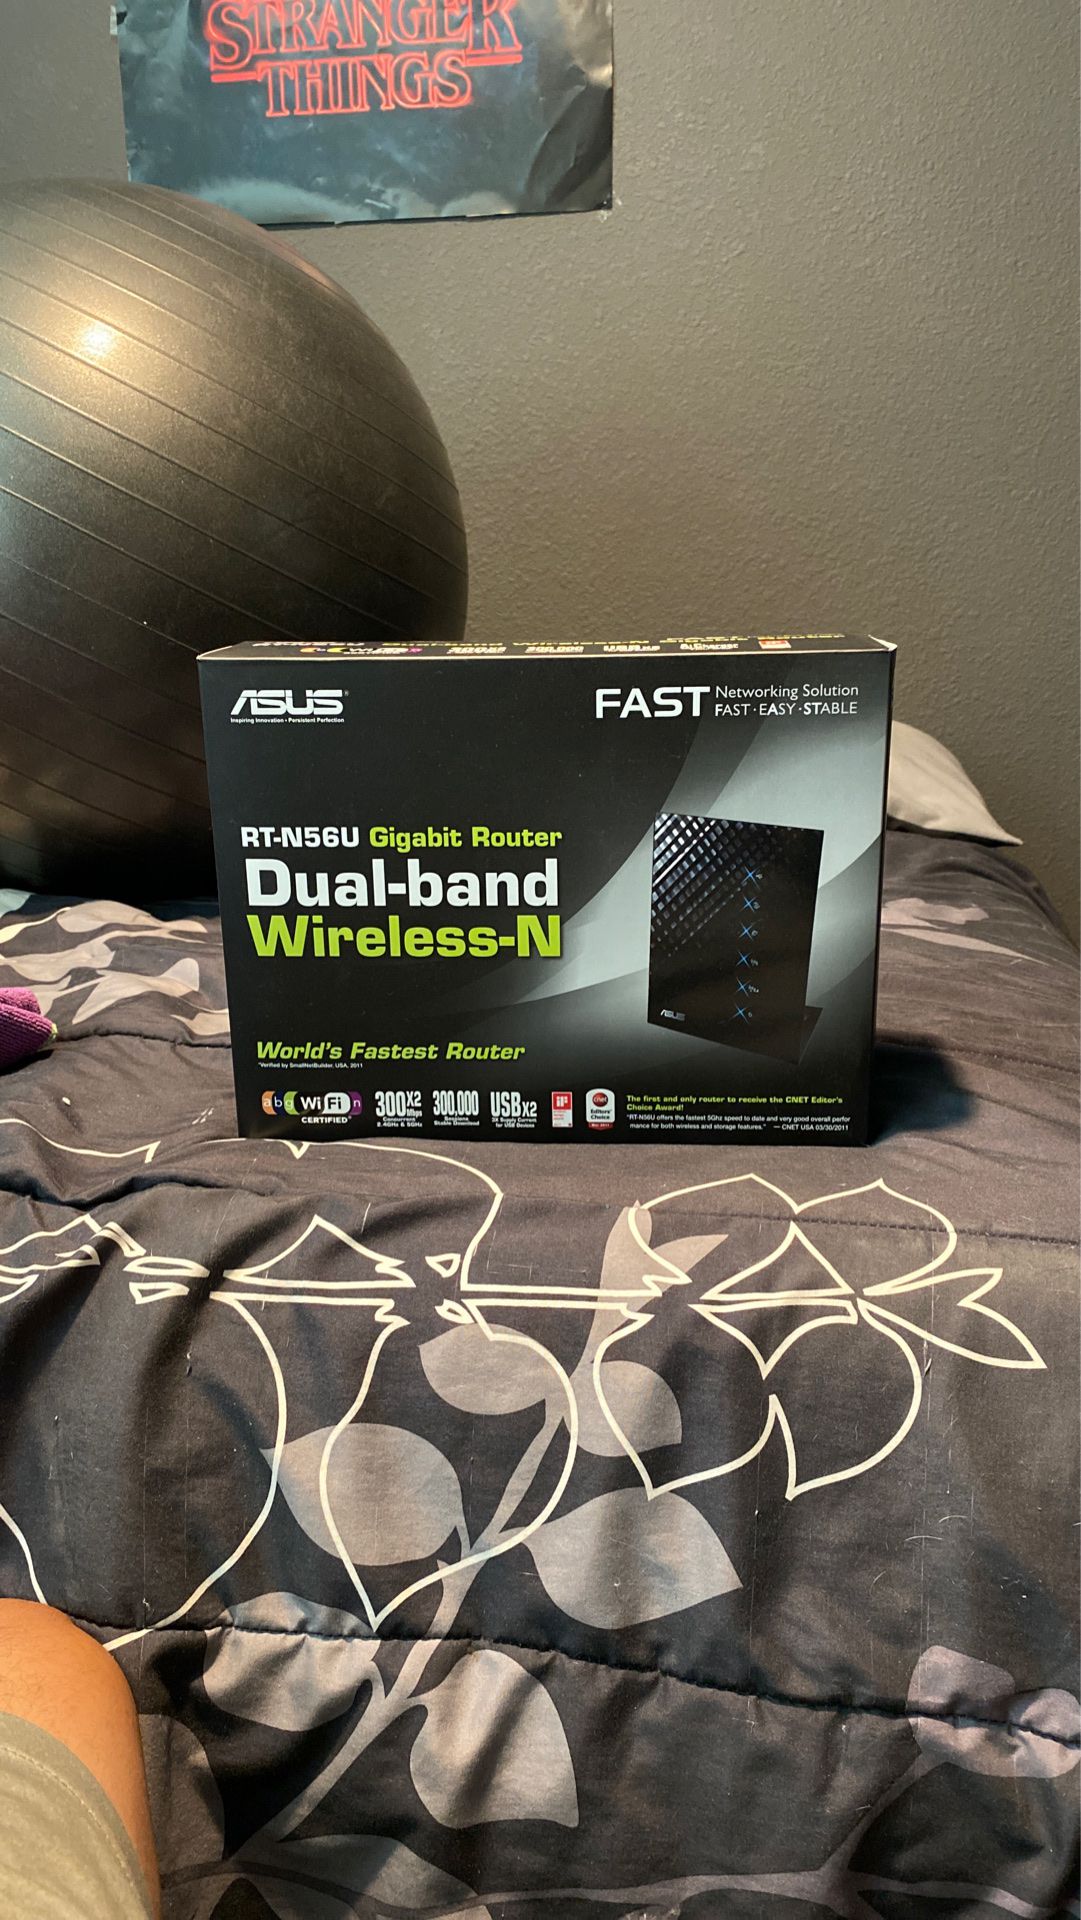 Asus wireless router RT N56U